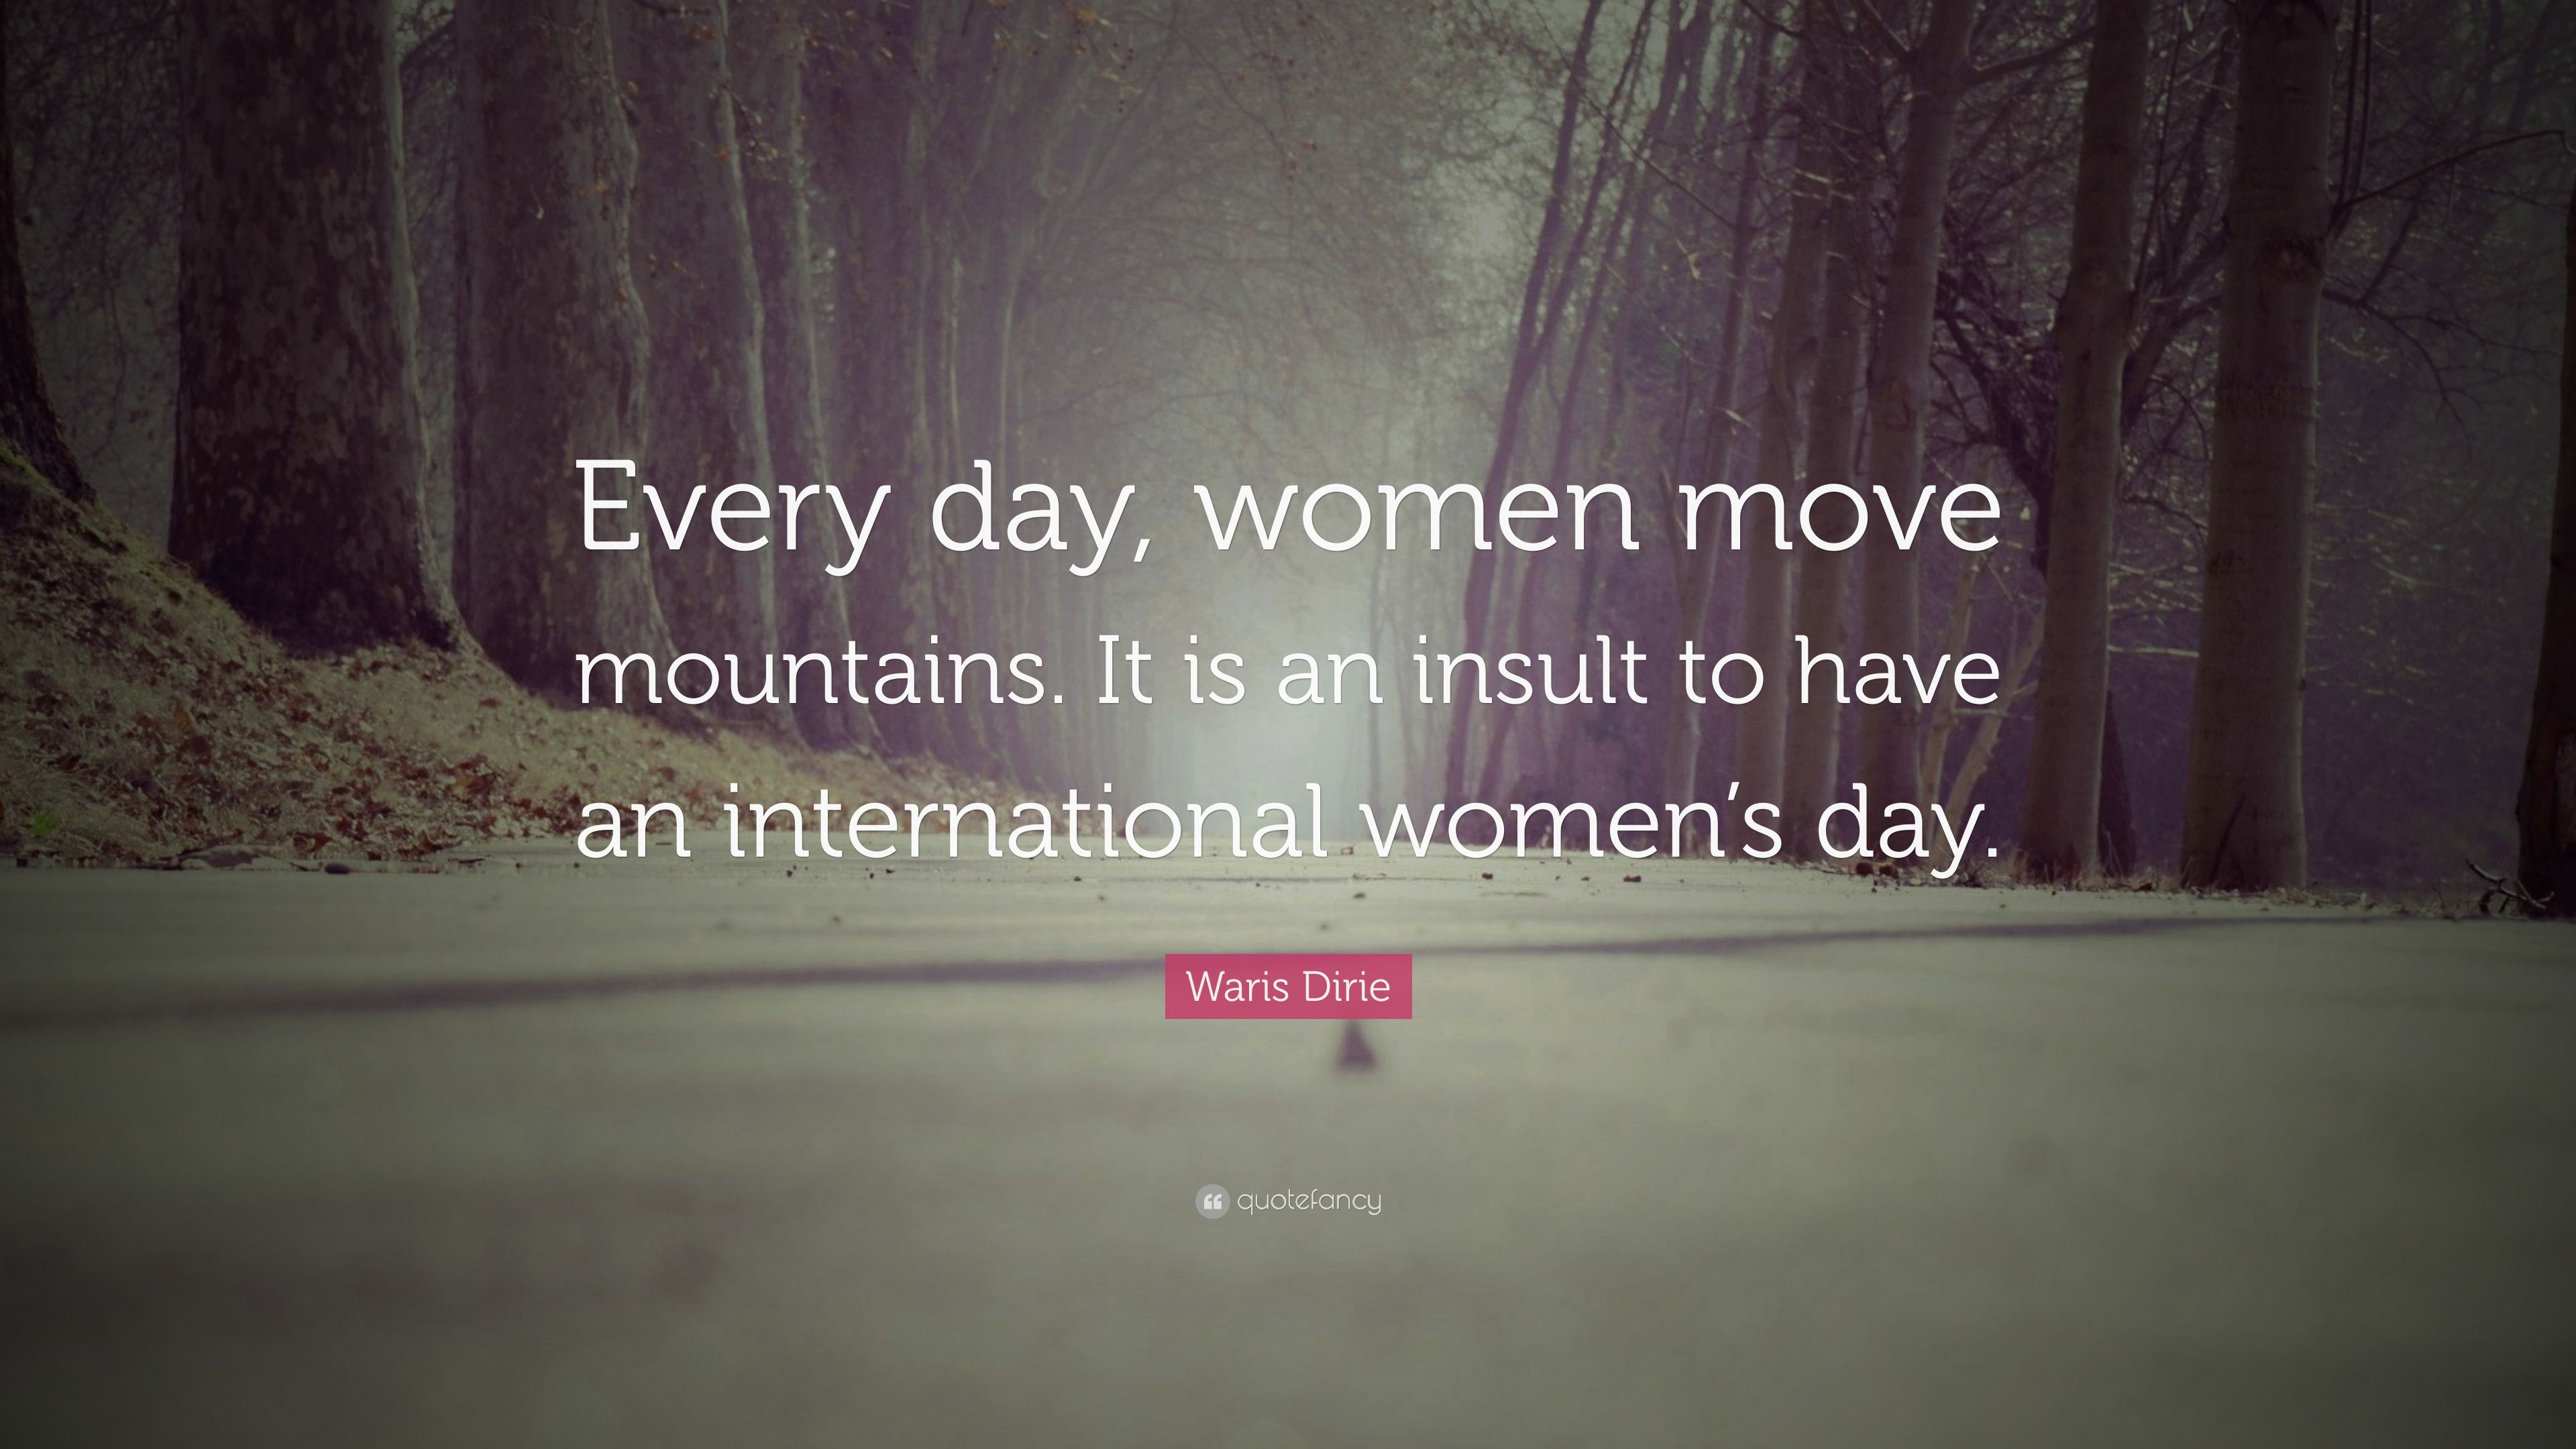 Waris Dirie Quote: “Every day, women move mountains. It is an